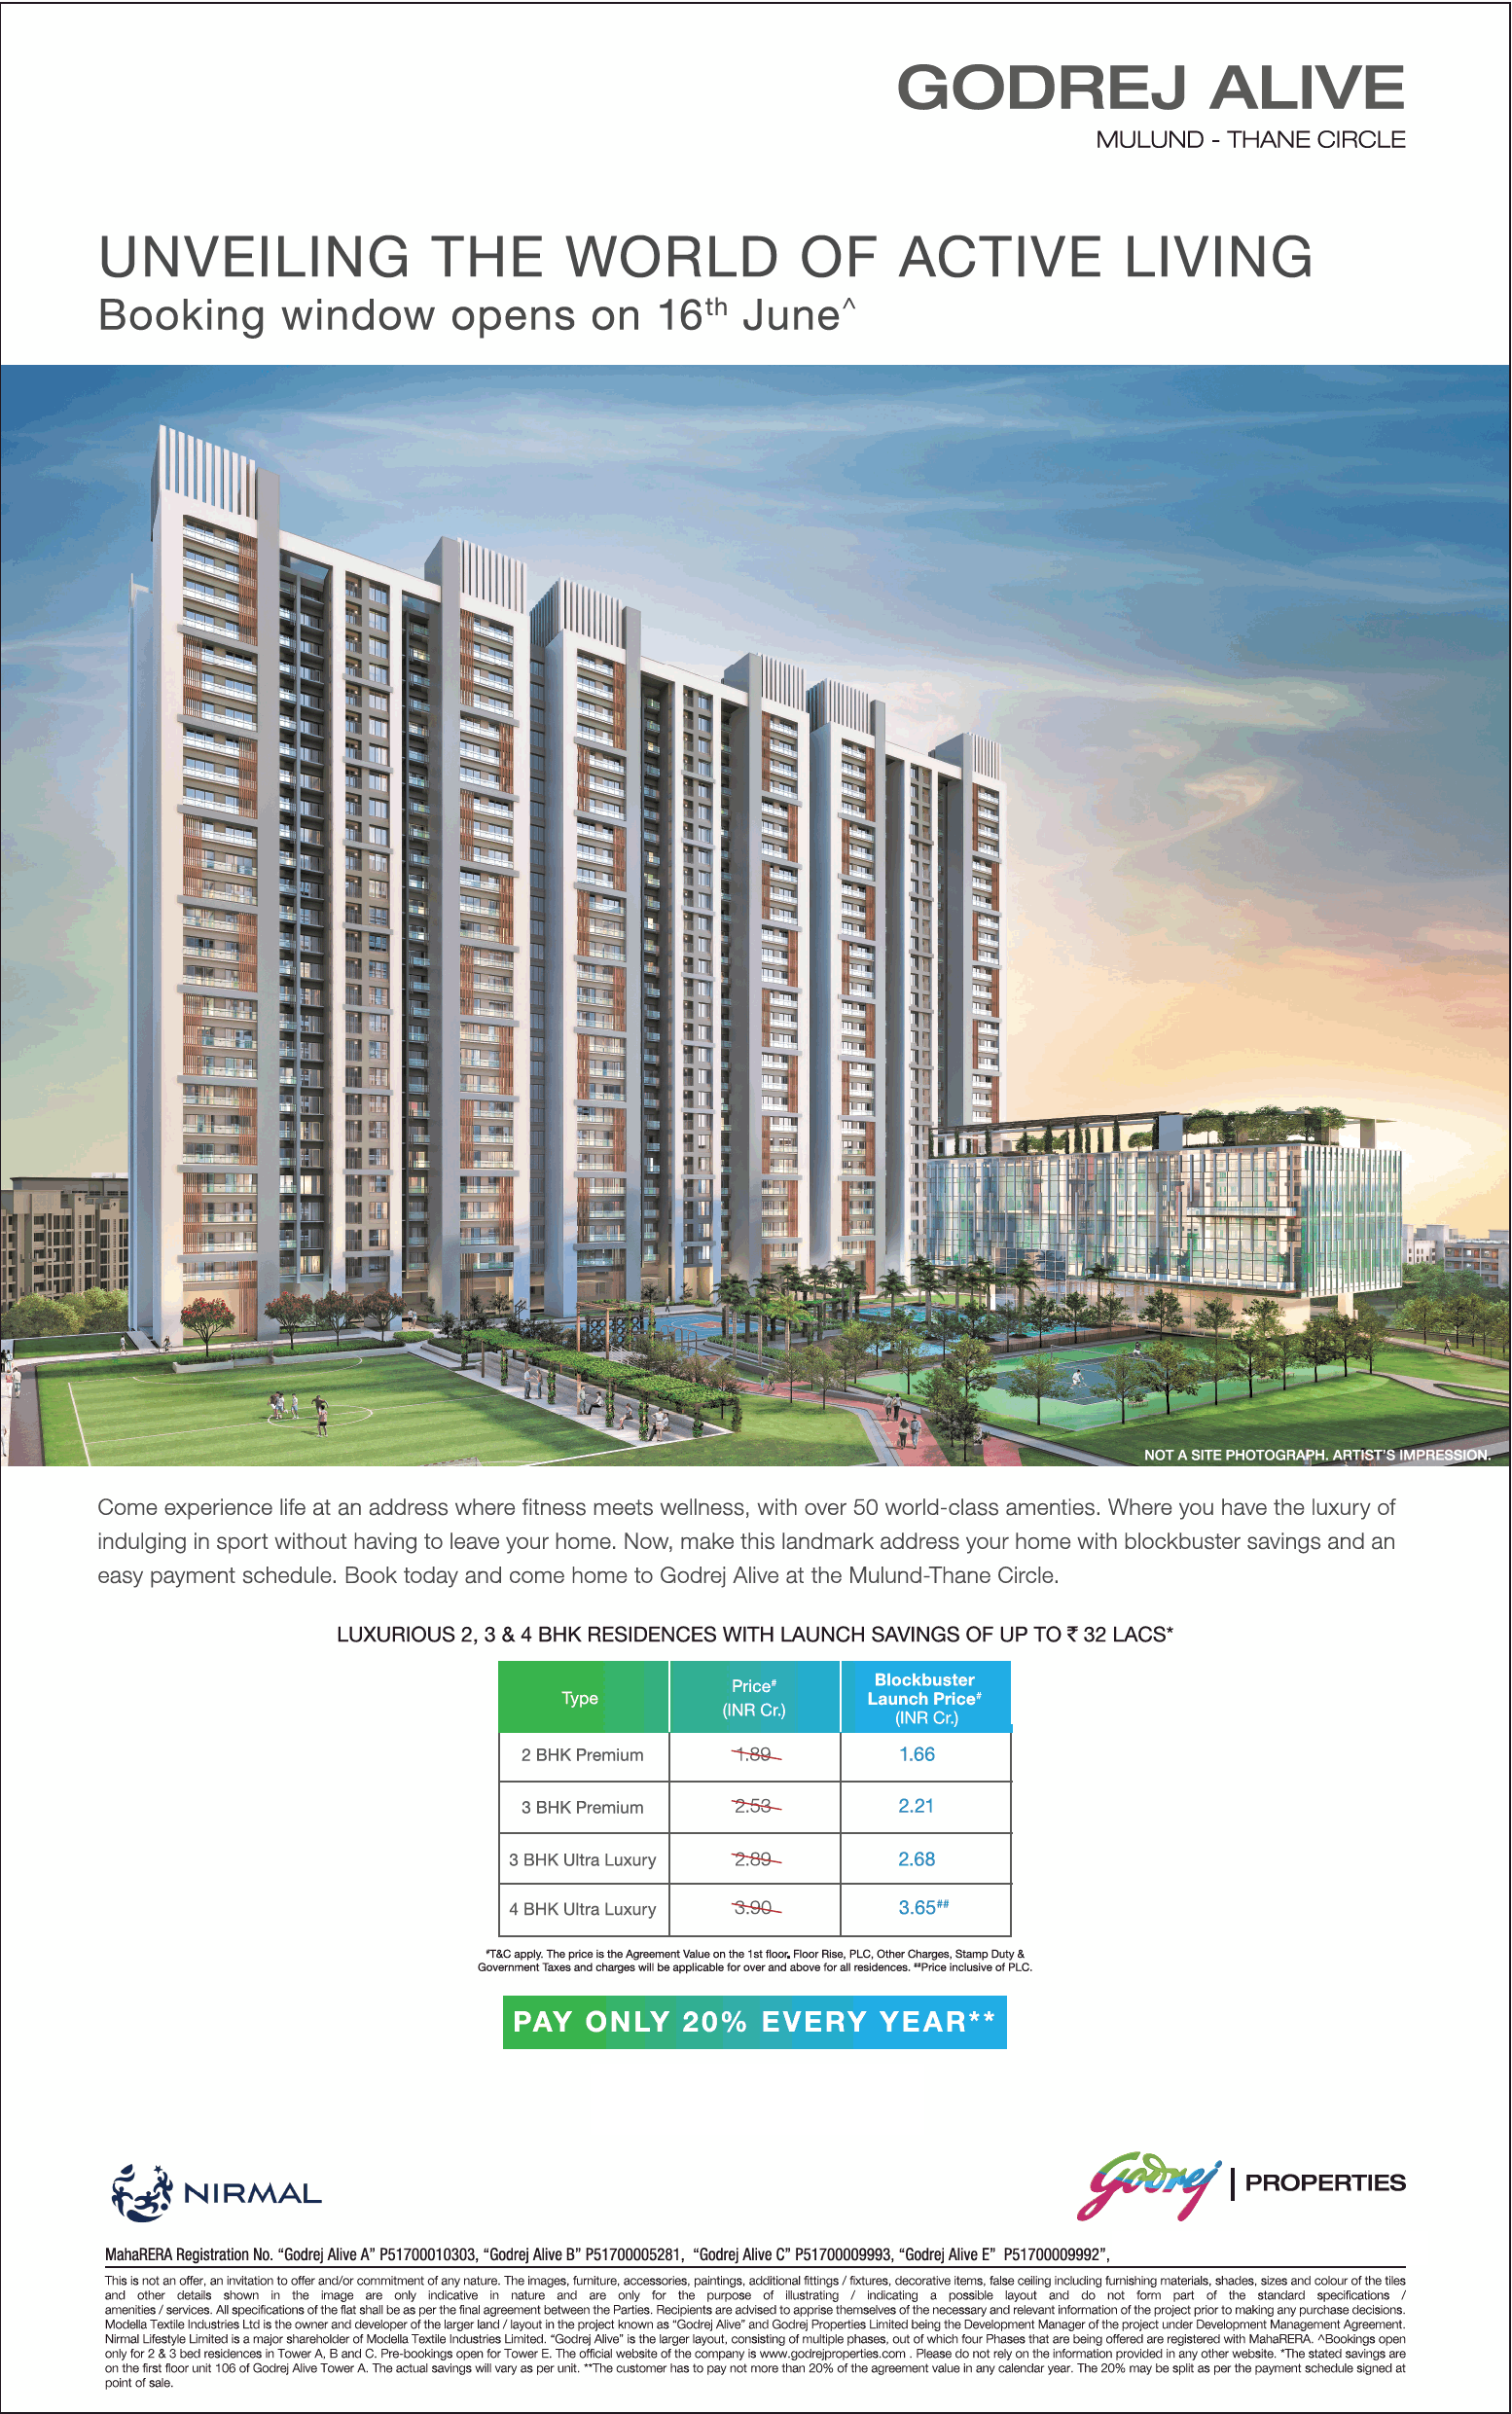 Book 2, 3, 4 bhk with launch savings up to 32 lacs at Godrej Alive in Mumbai